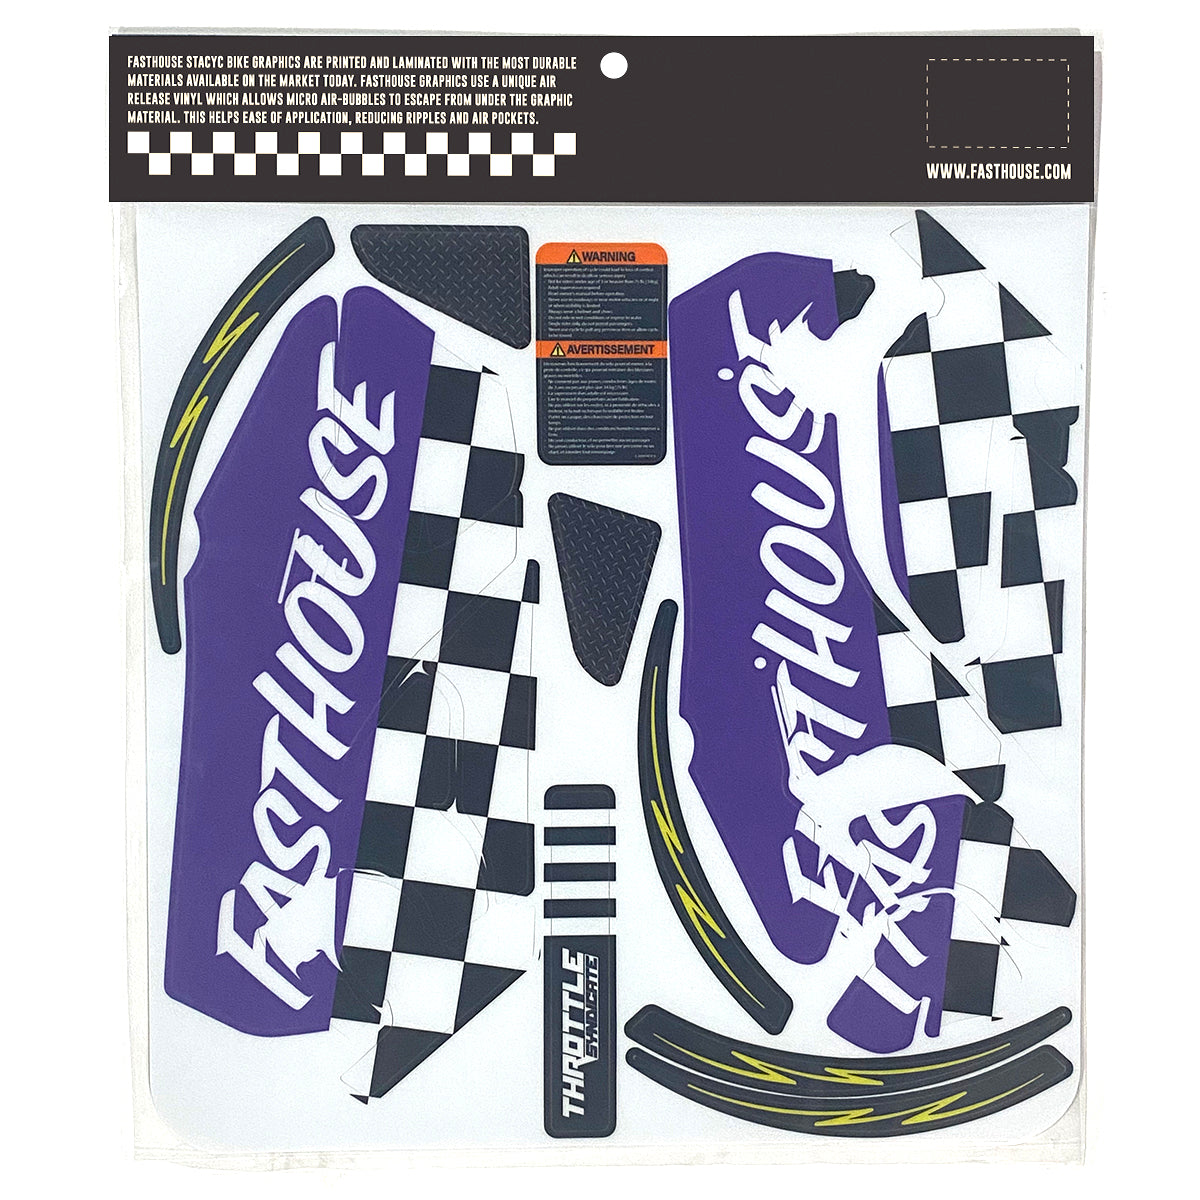 FH Tribe Stacyc Decal Kit - Purple